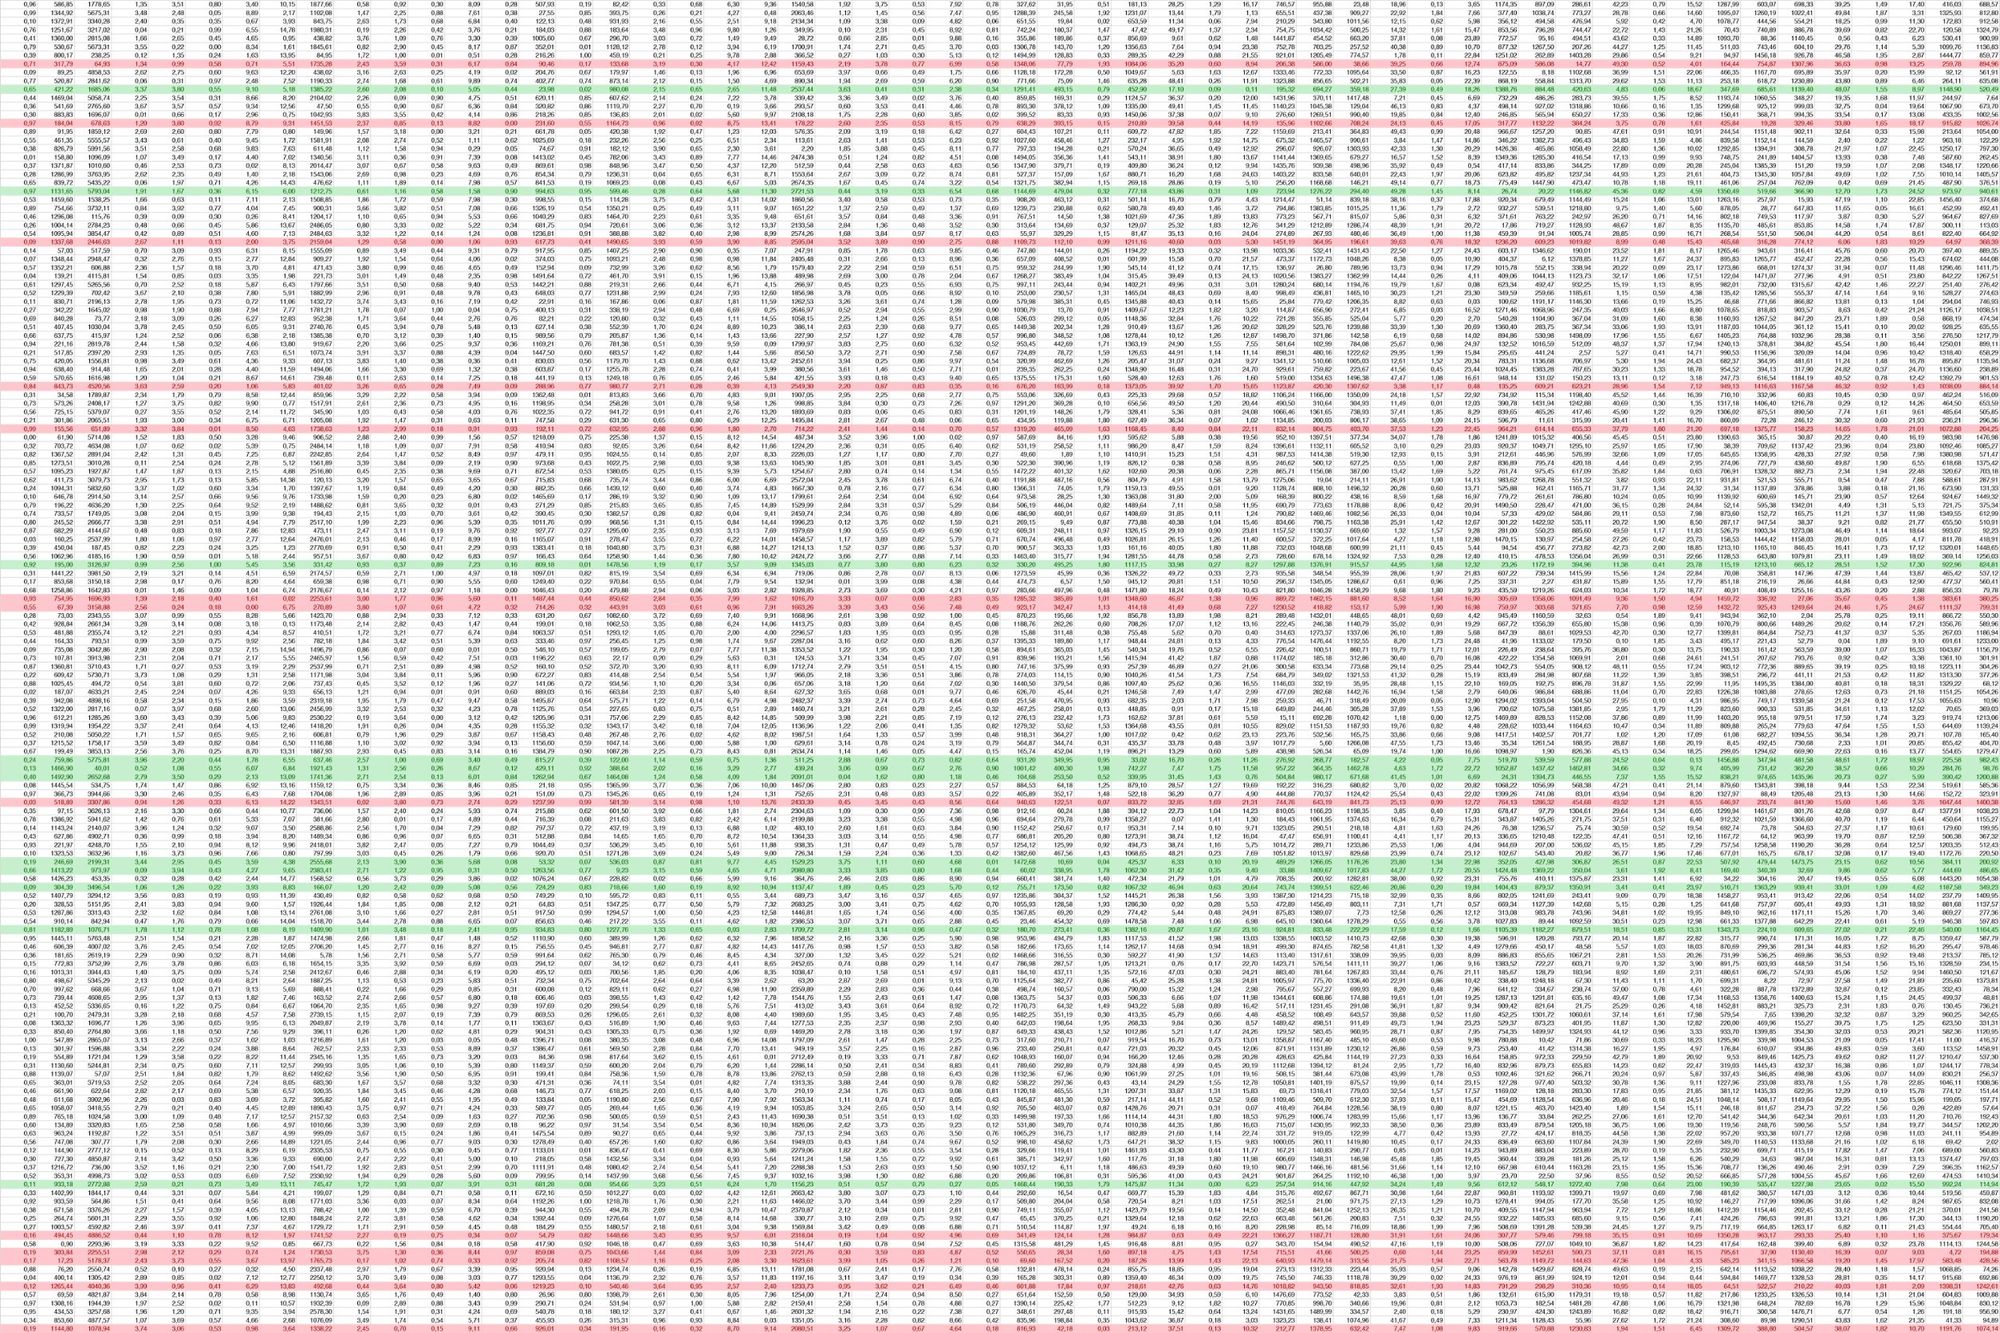 A huge amount of numbers in a spreadsheet with some rows highlighted in red or green. 